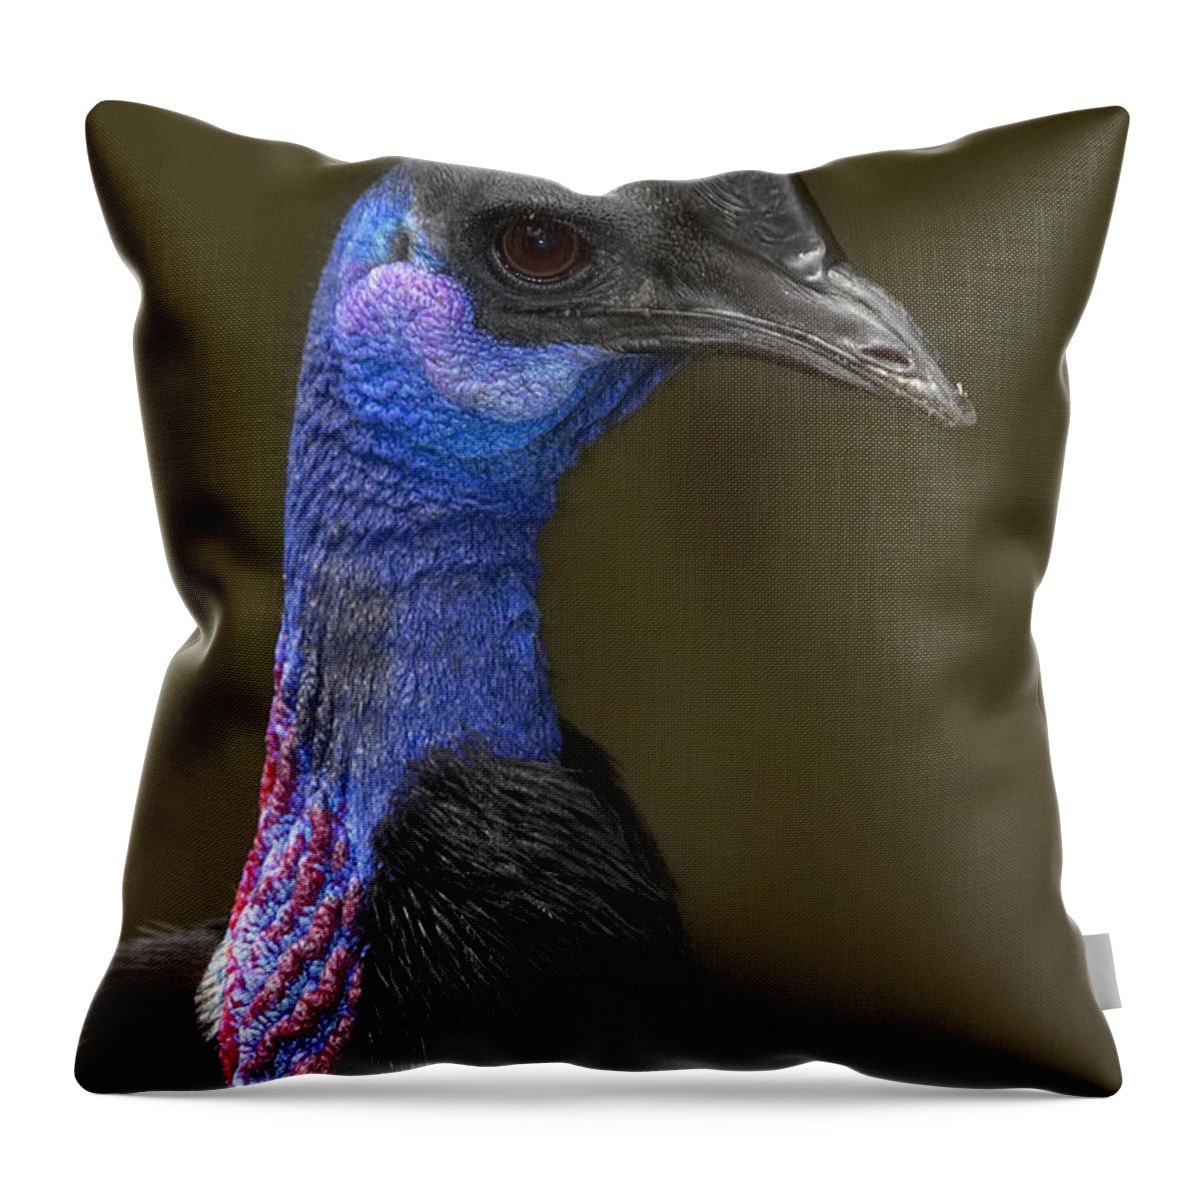 Feb0514 Throw Pillow featuring the photograph Dwarf Cassowary Portrait by San Diego Zoo